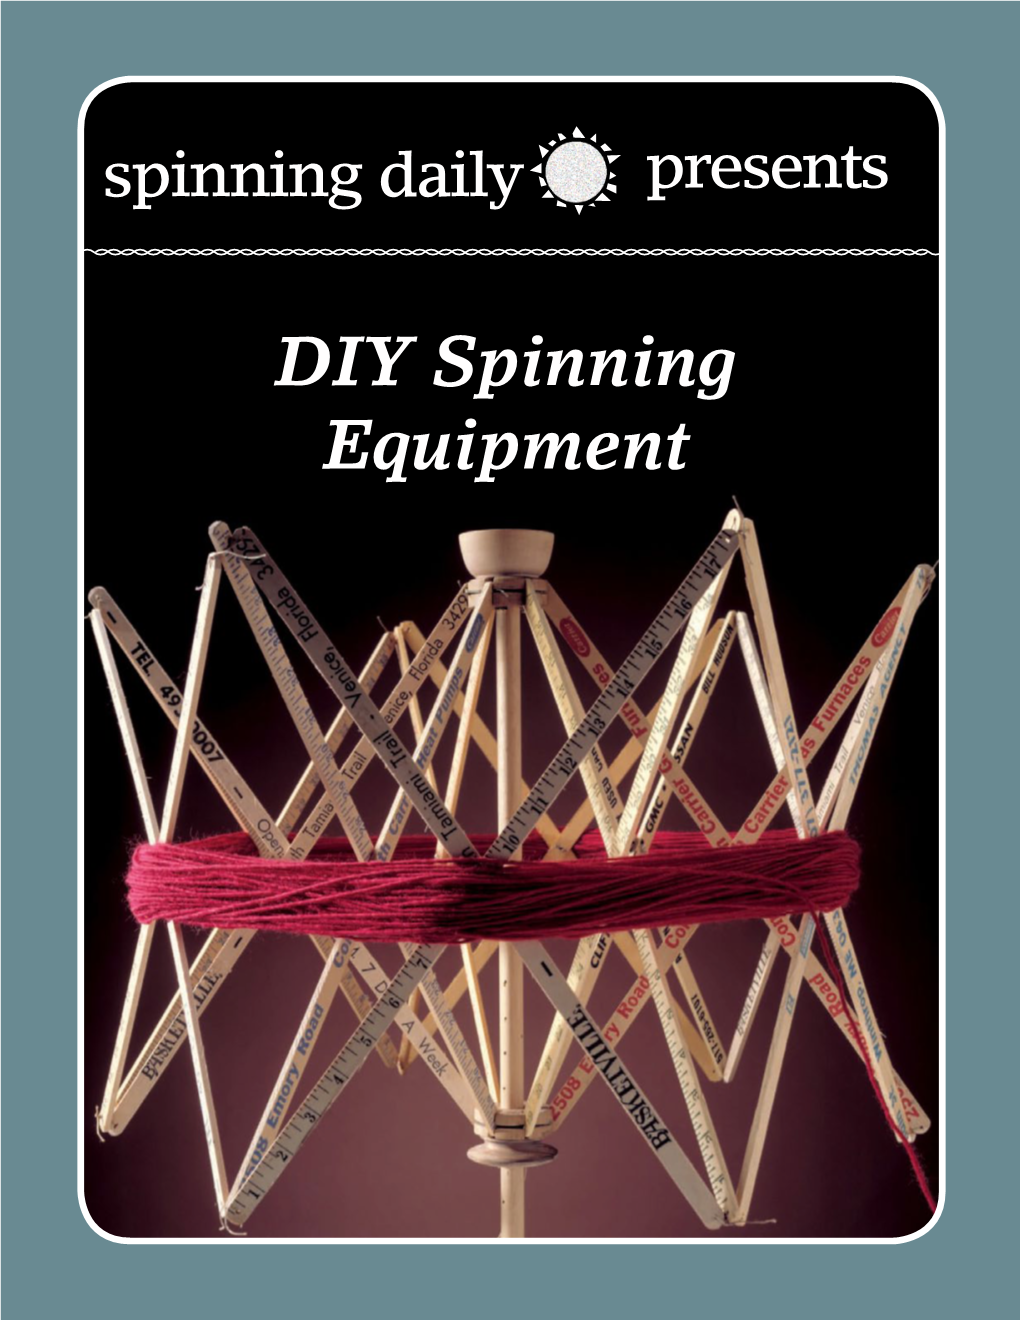 Spinning Daily Presents DIY Spinning Equipment